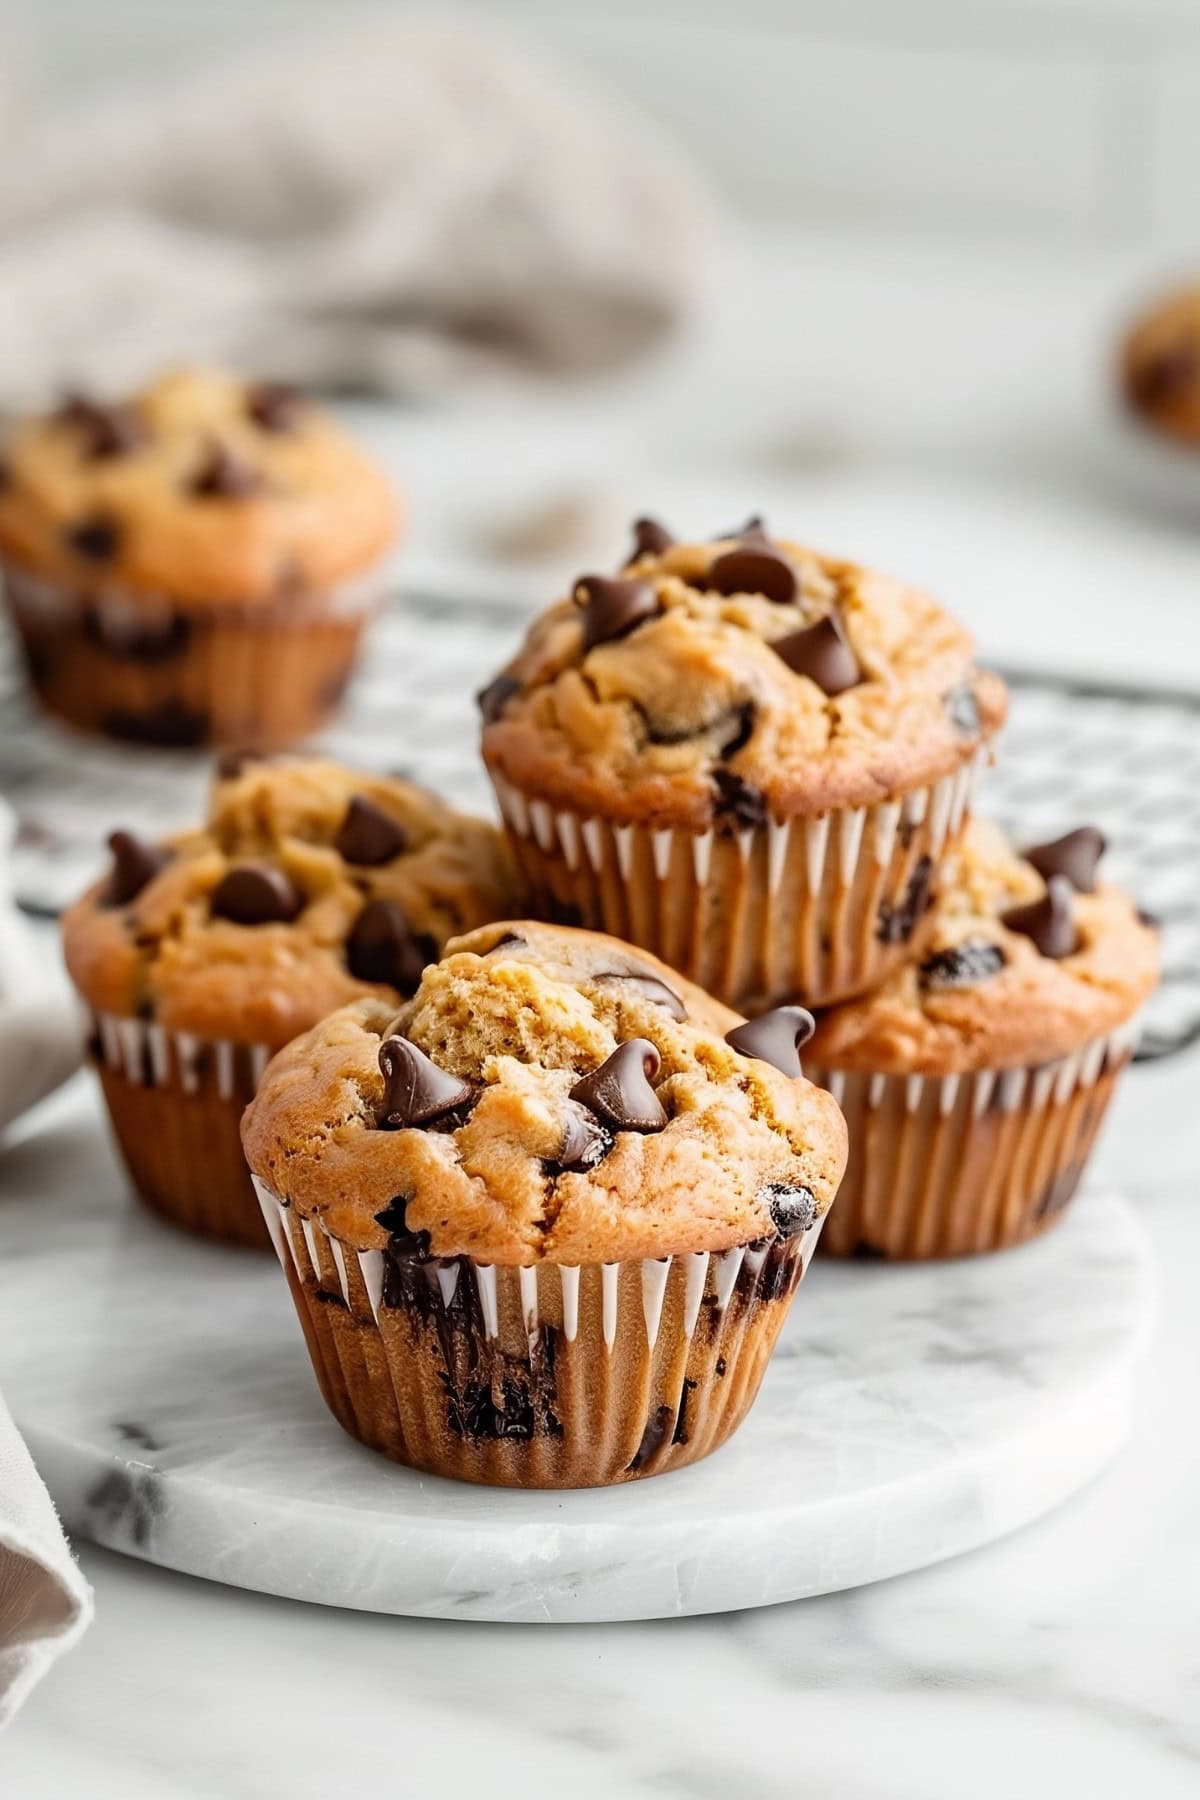 Irresistible peanut butter chocolate chip muffins, perfect for satisfying your sweet cravings